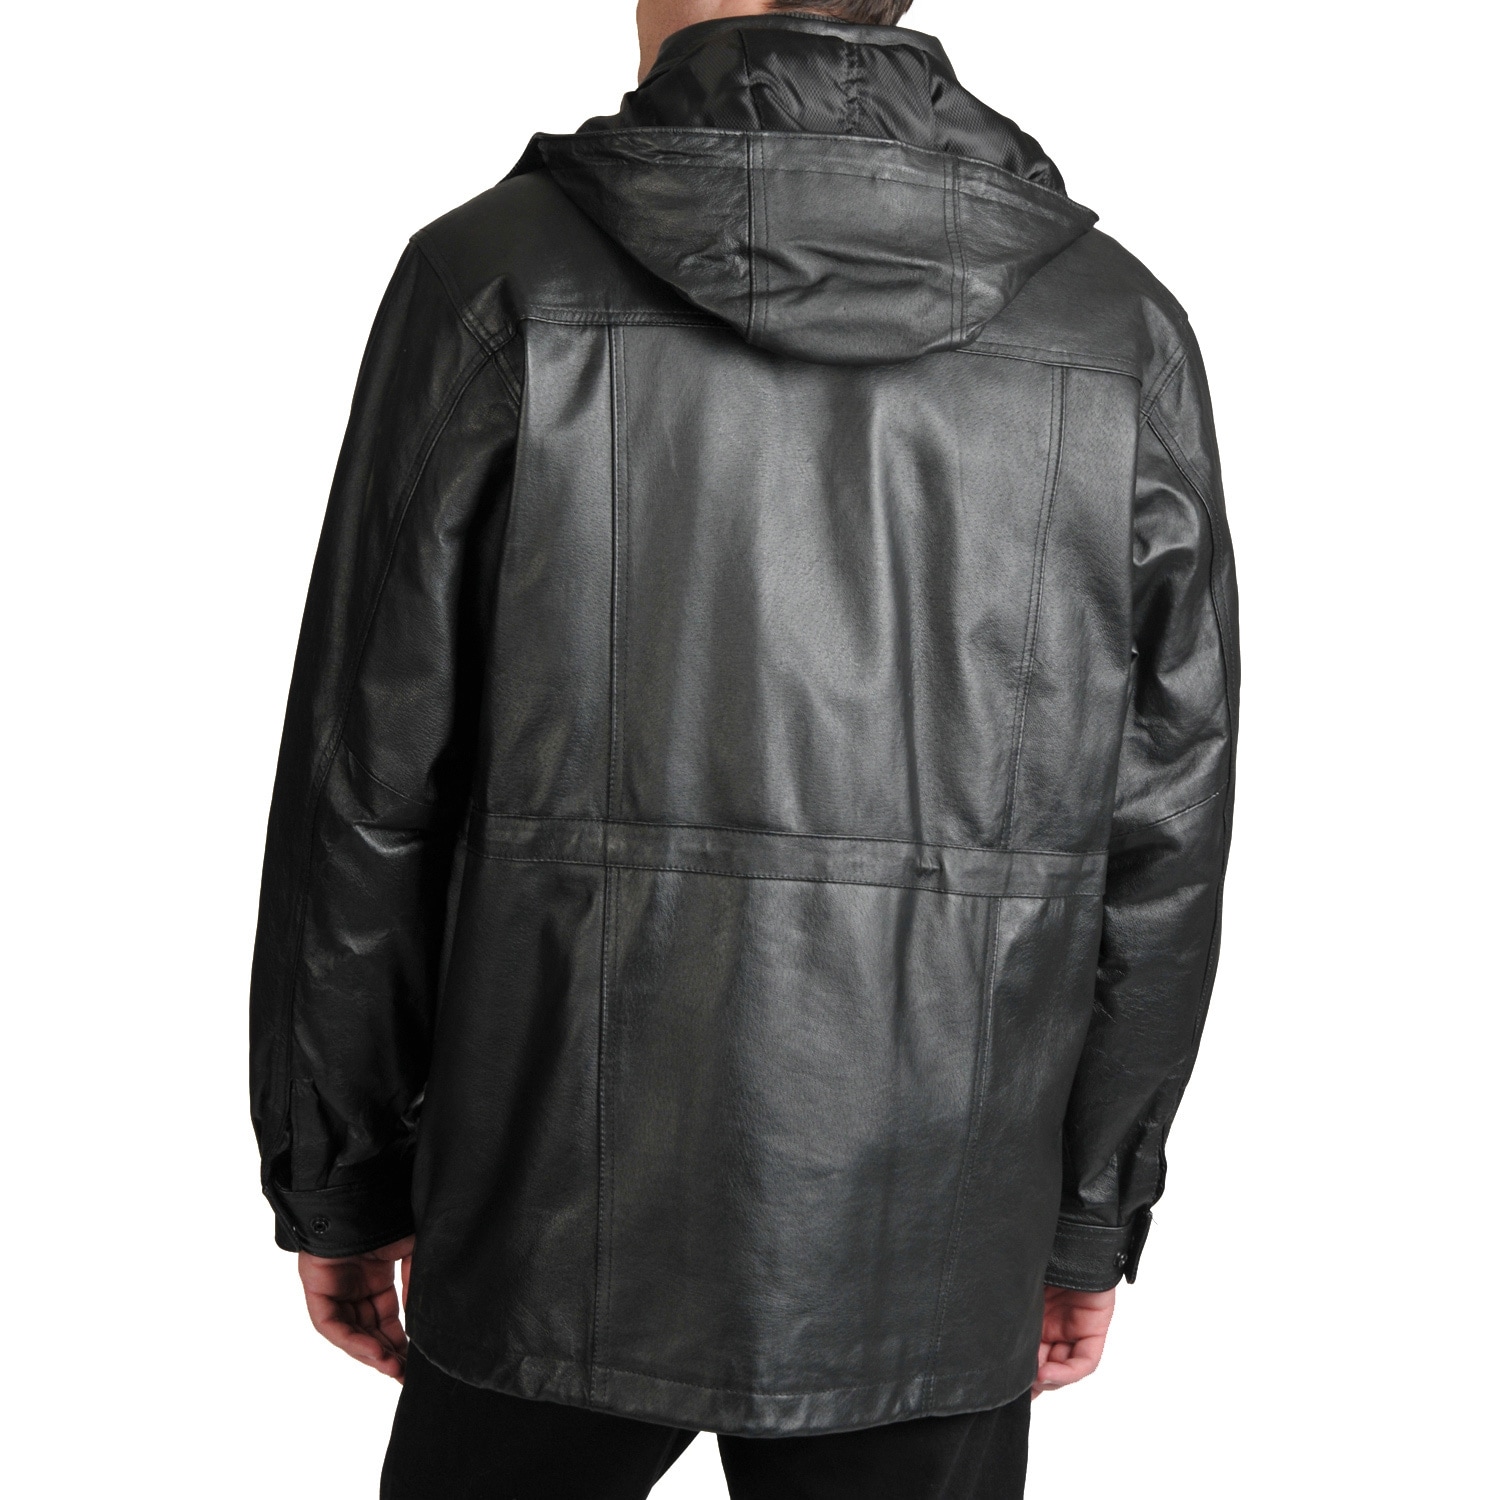 Excelled Men's Leather Parka with Removable Hood | eBay